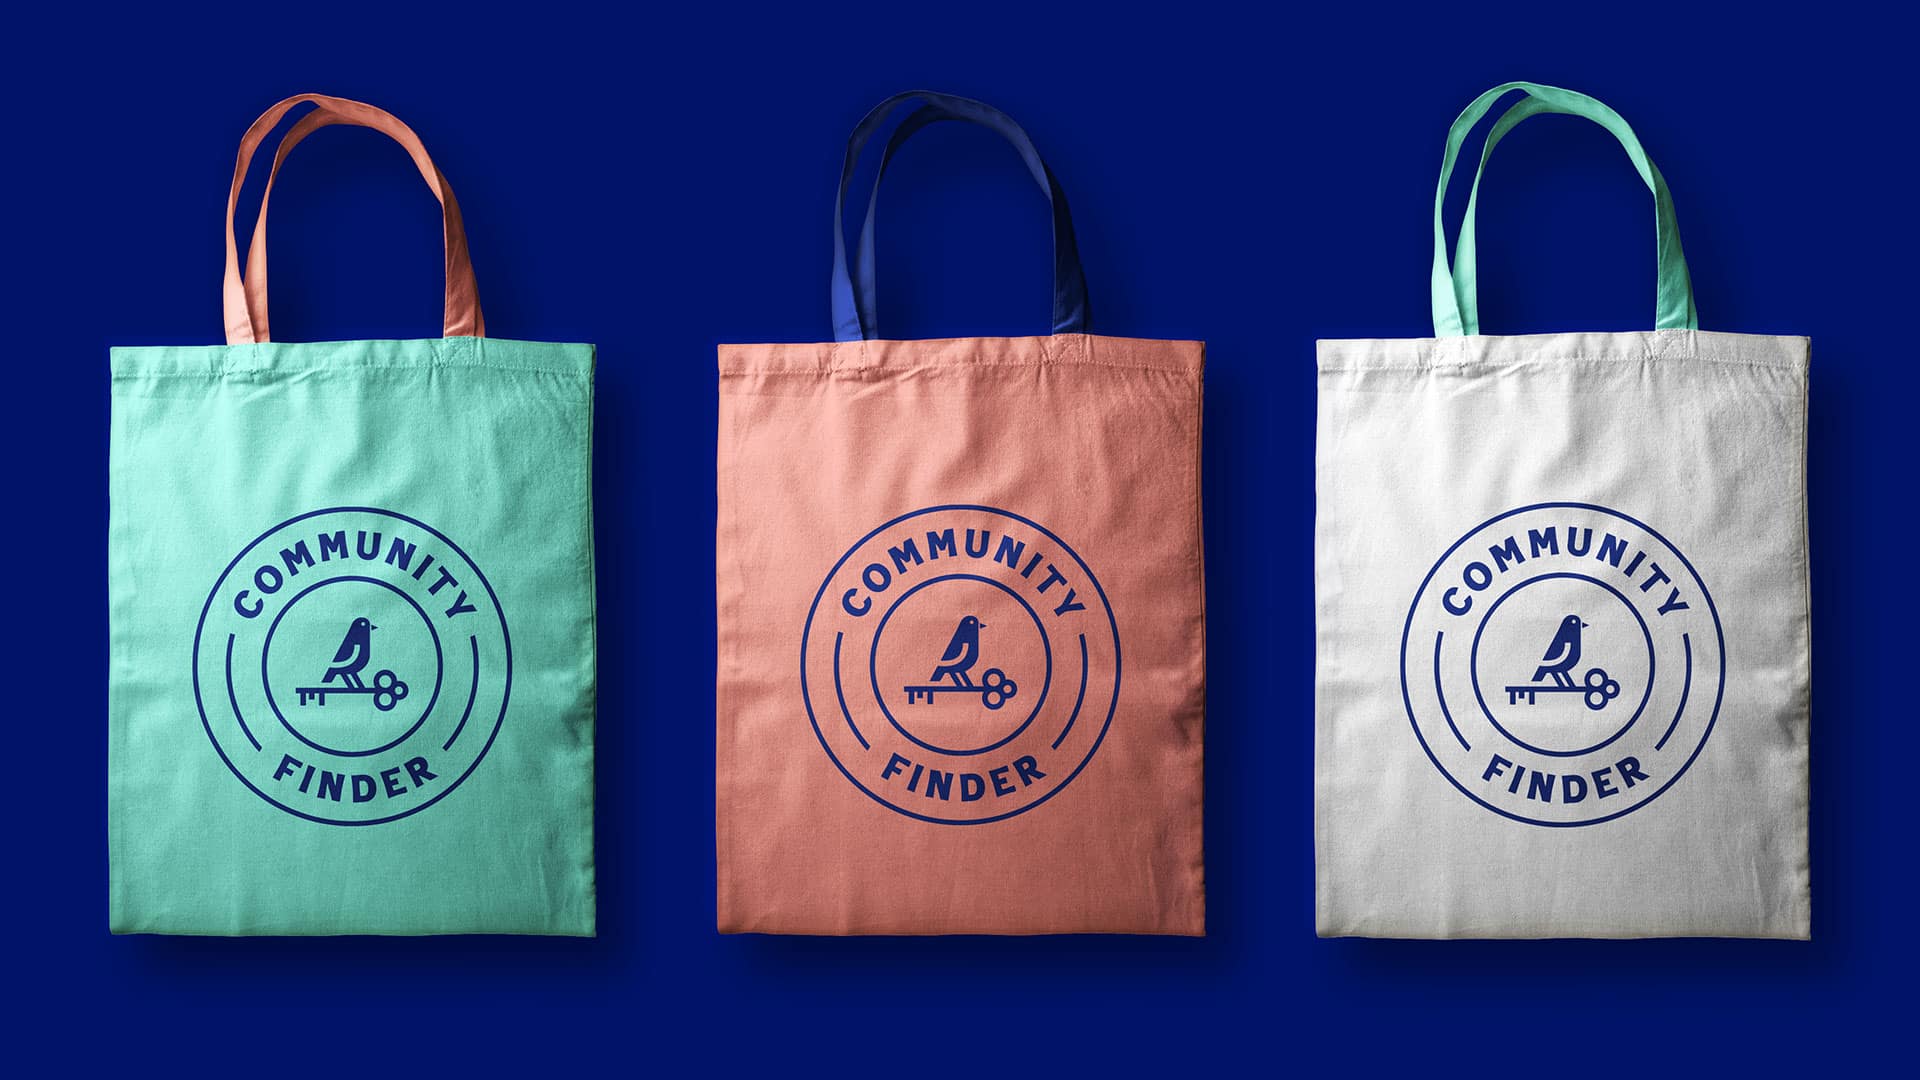 Community Finder Tote Bags